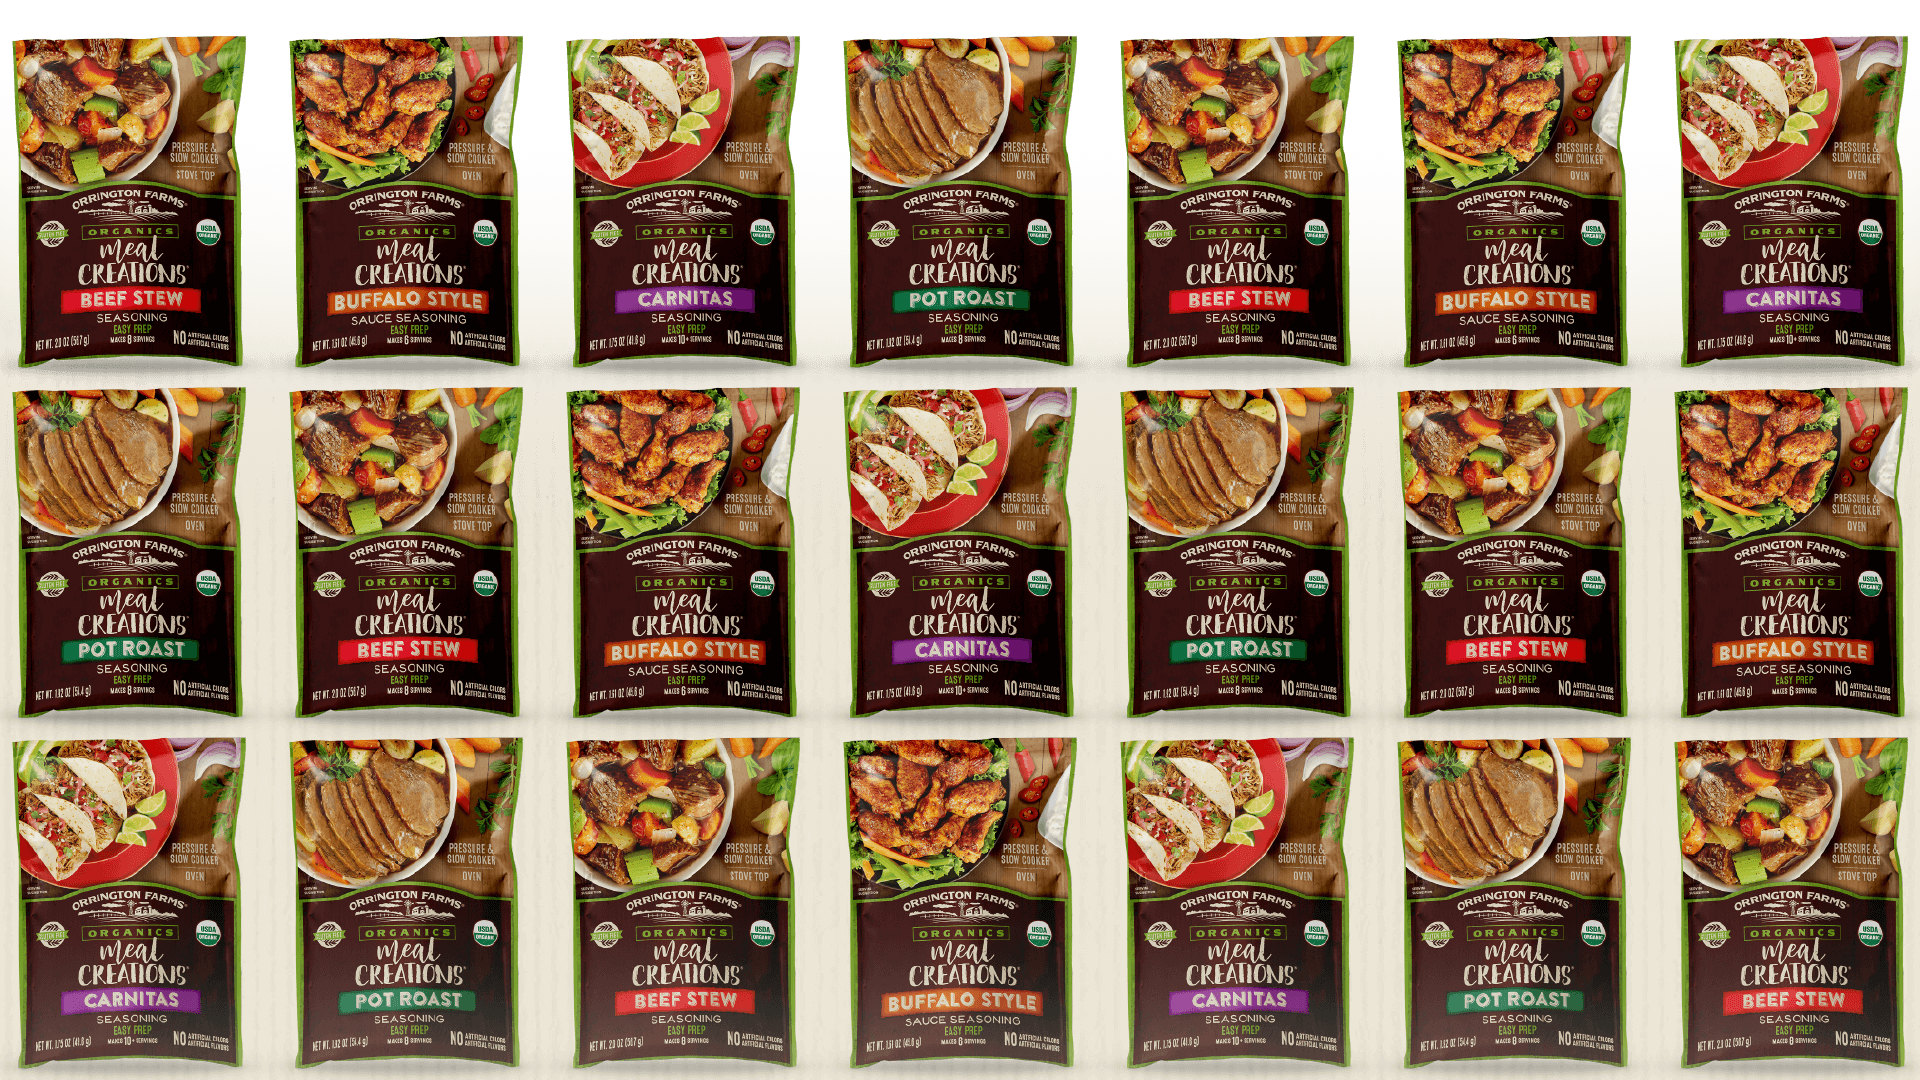 Orrington Farms Meal Creations Organics Products Packets Wall